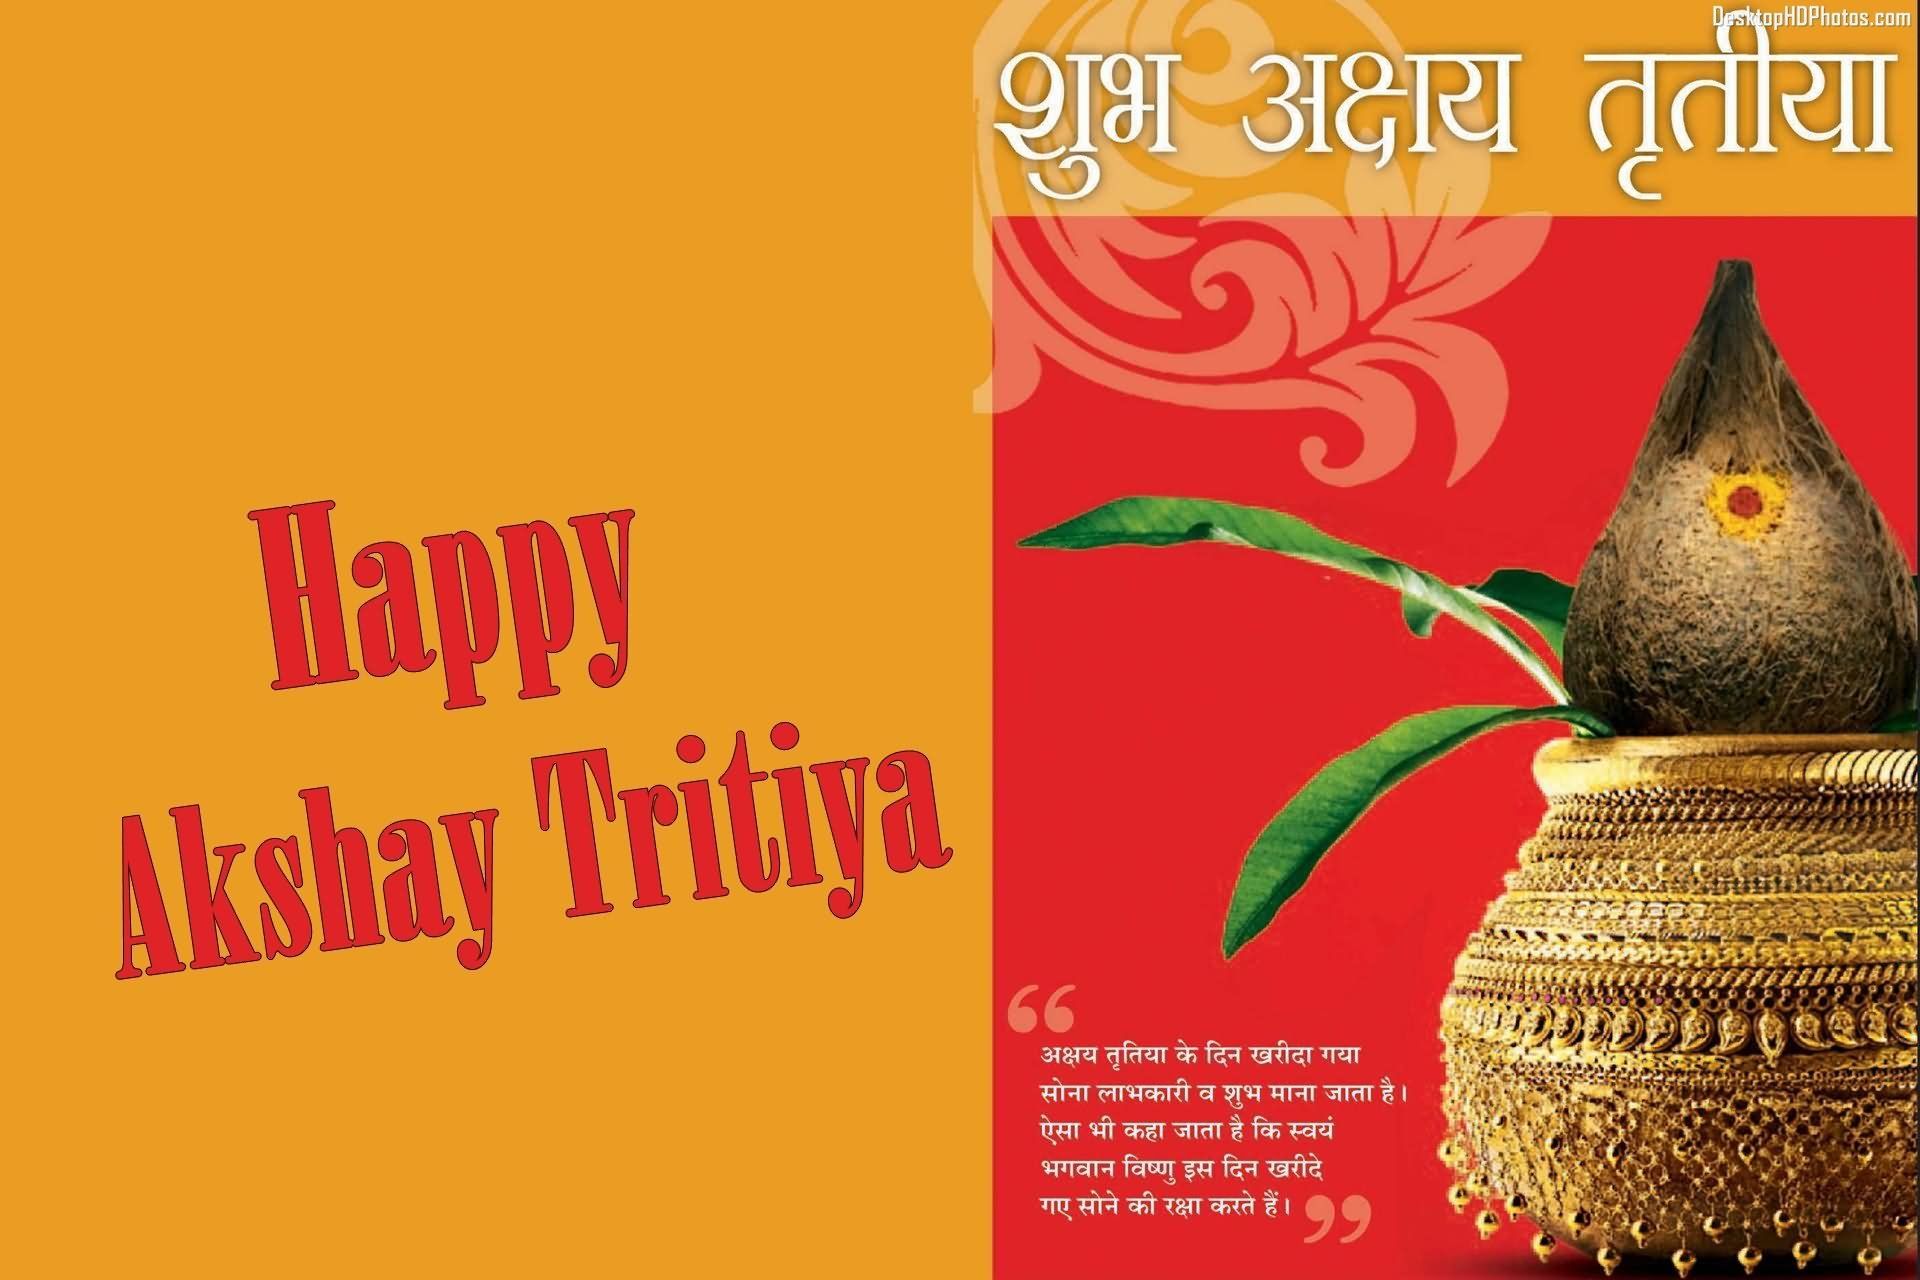 Akshaya Tritiya is very sacred and auspicious day. There is a